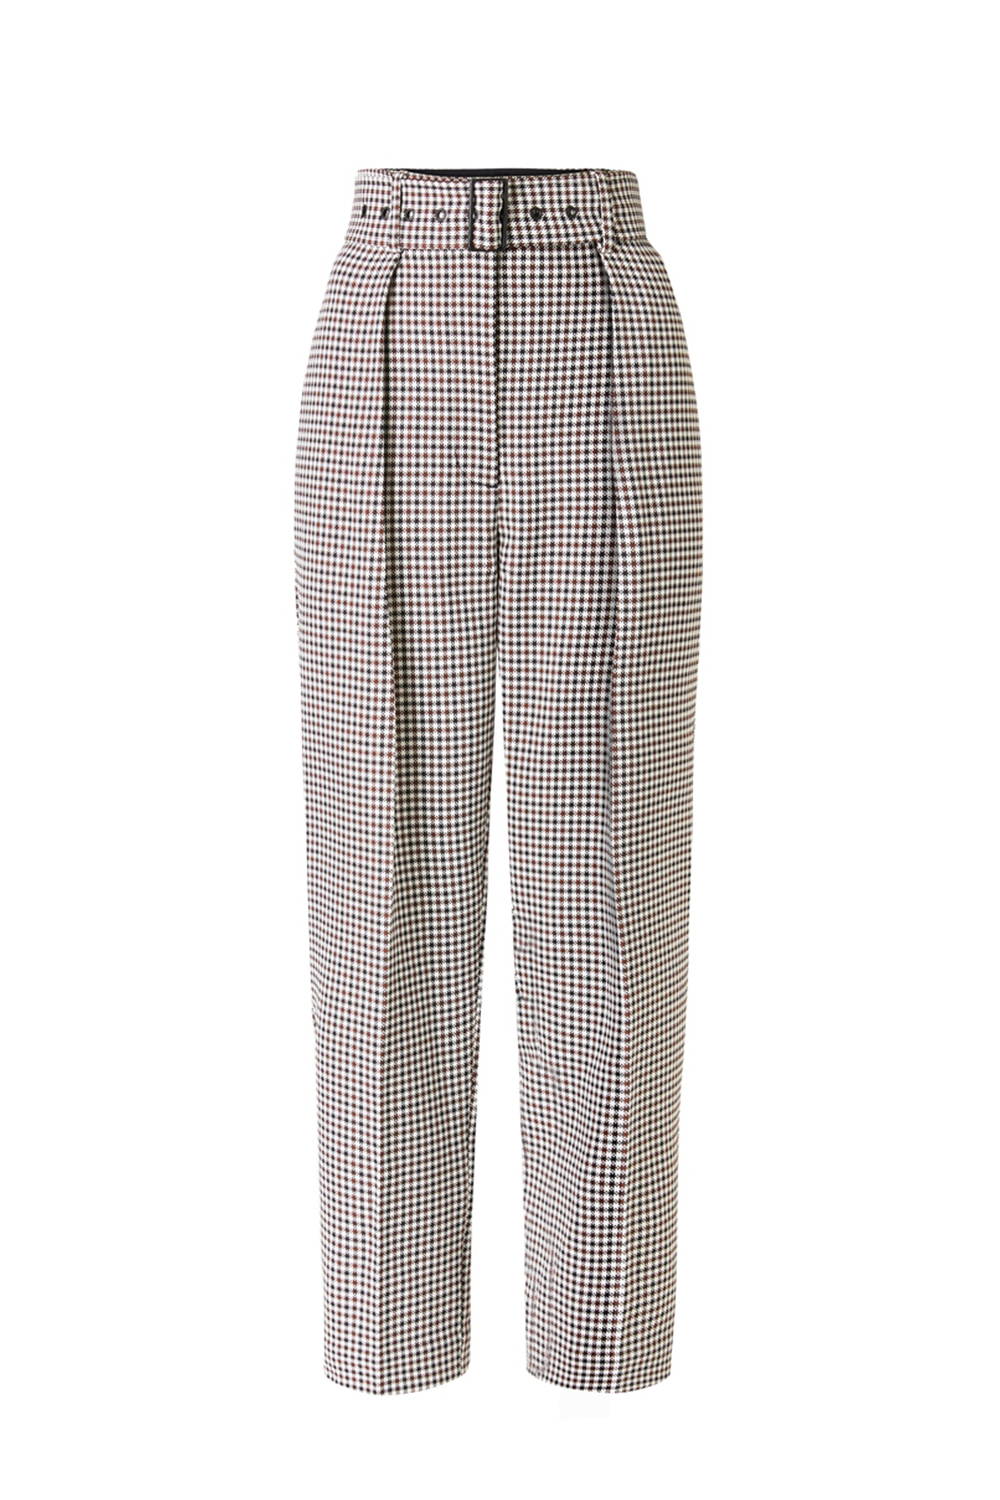 Oroton Check Belted Pant Black and White